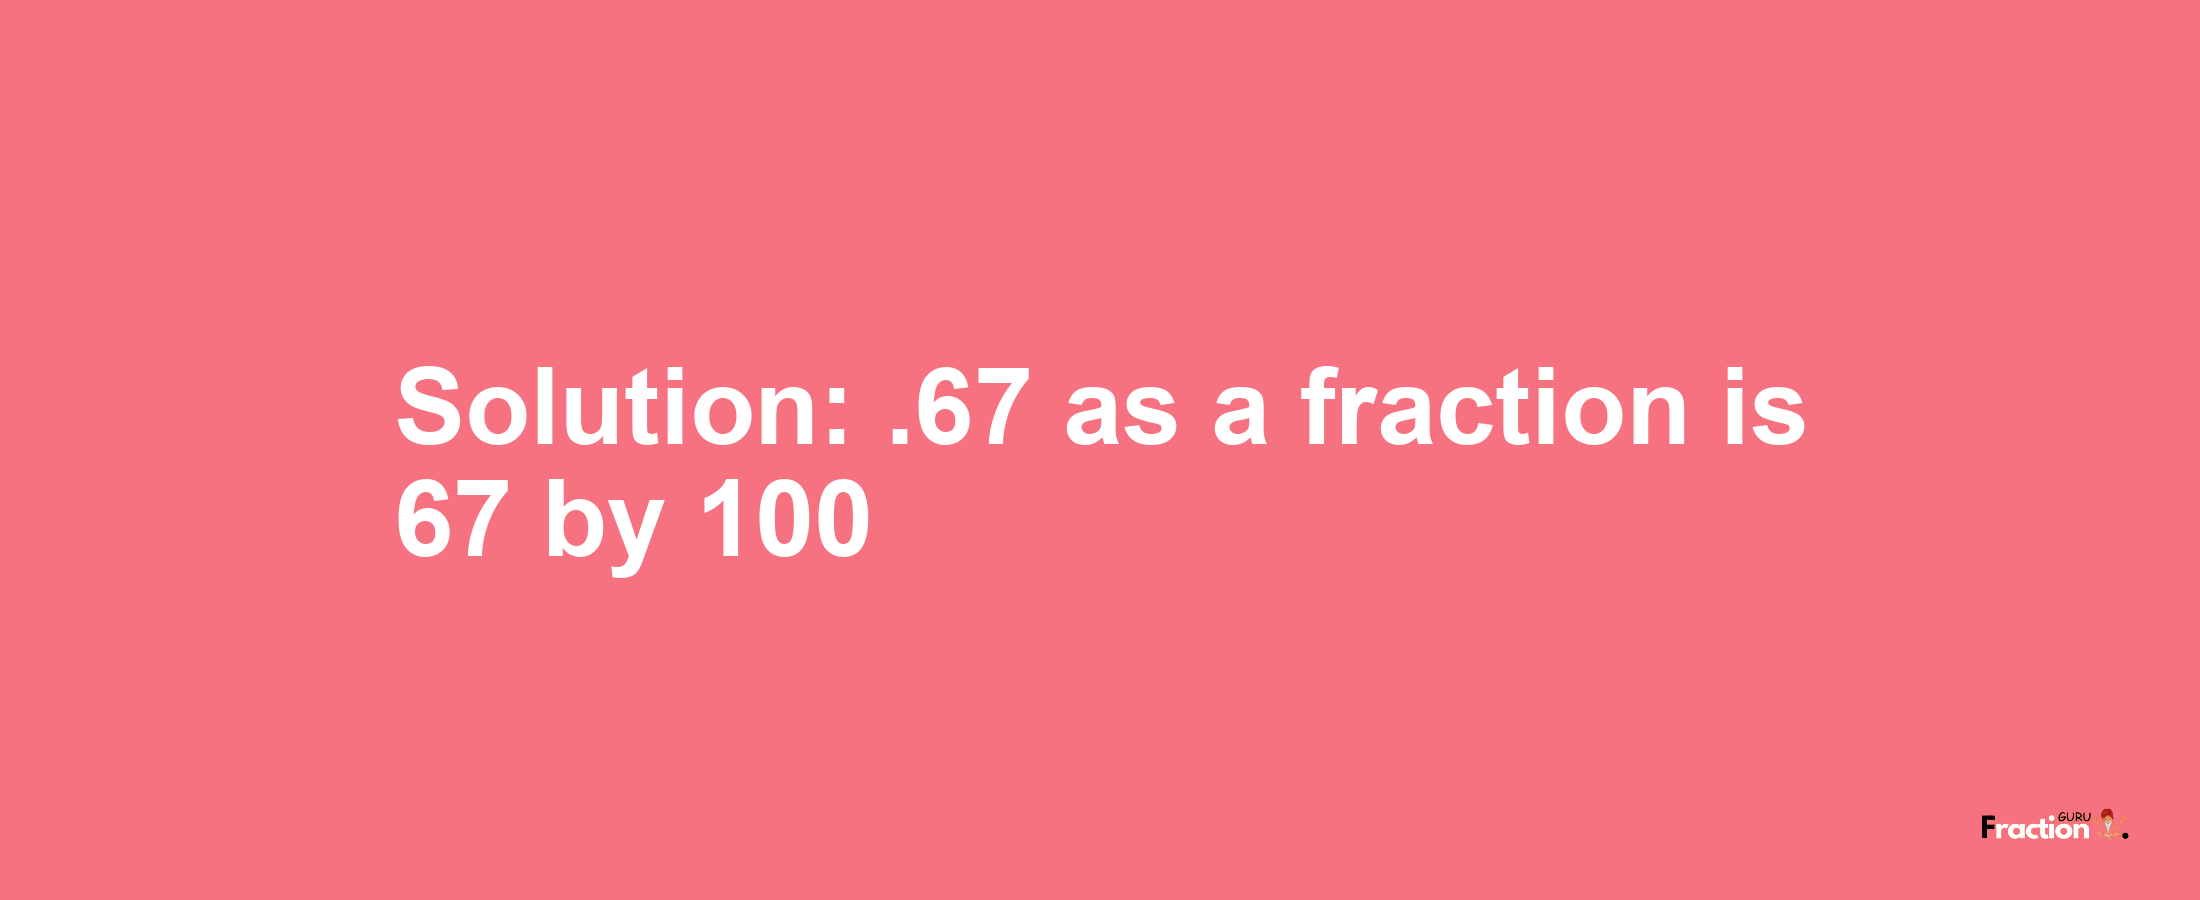 Solution:.67 as a fraction is 67/100